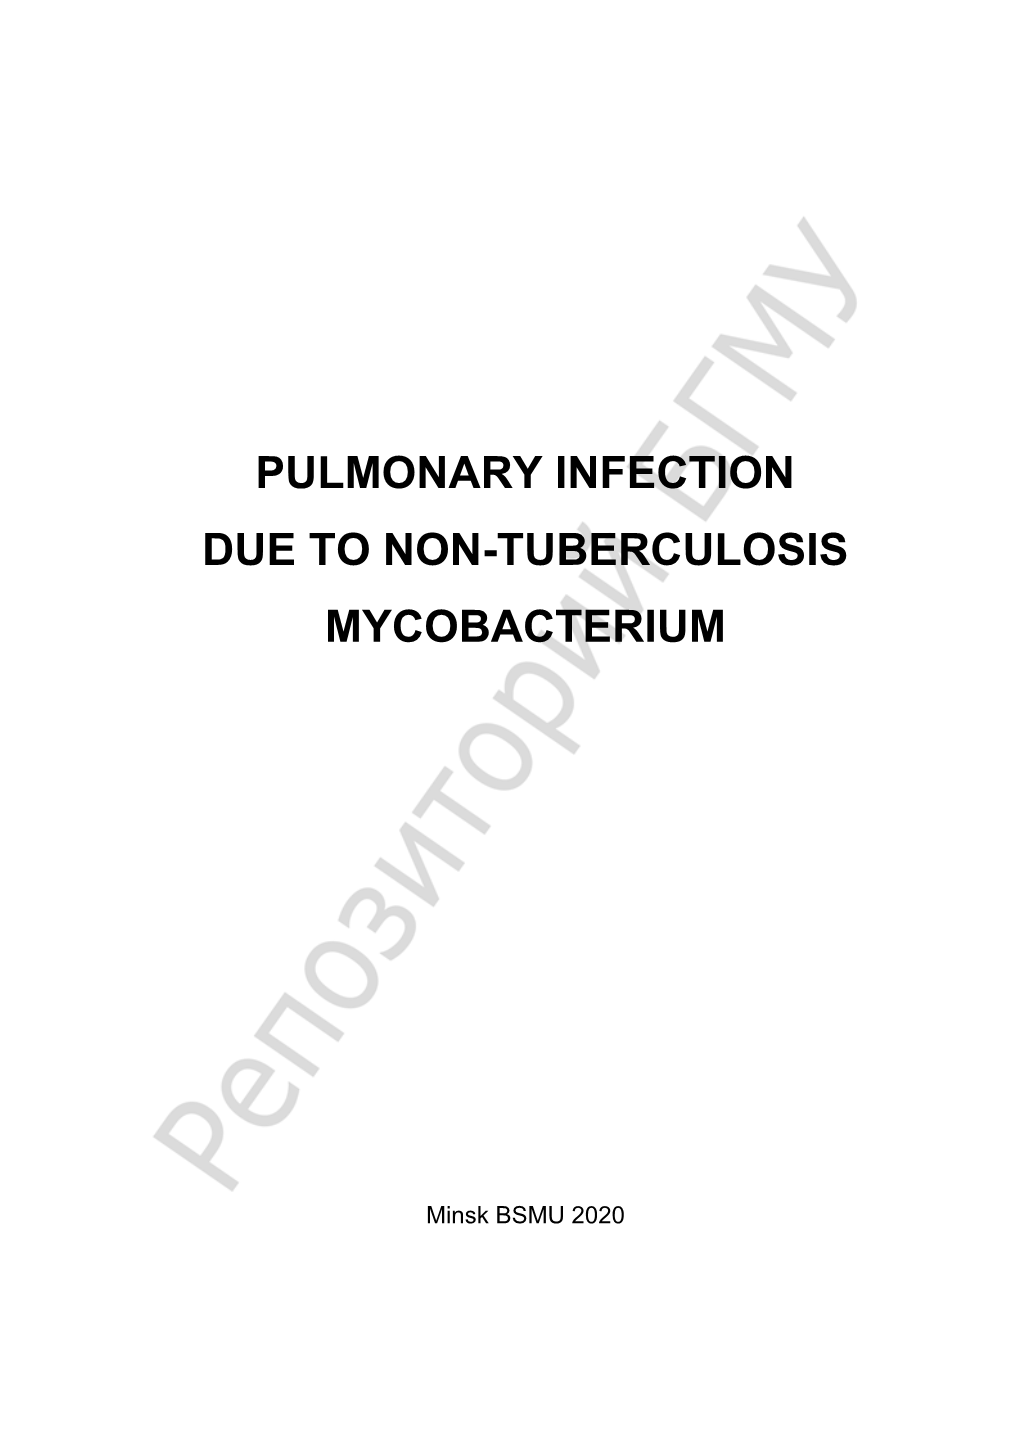 Pulmonary Infection Due to Non-Tuberculosis Mycobacterium